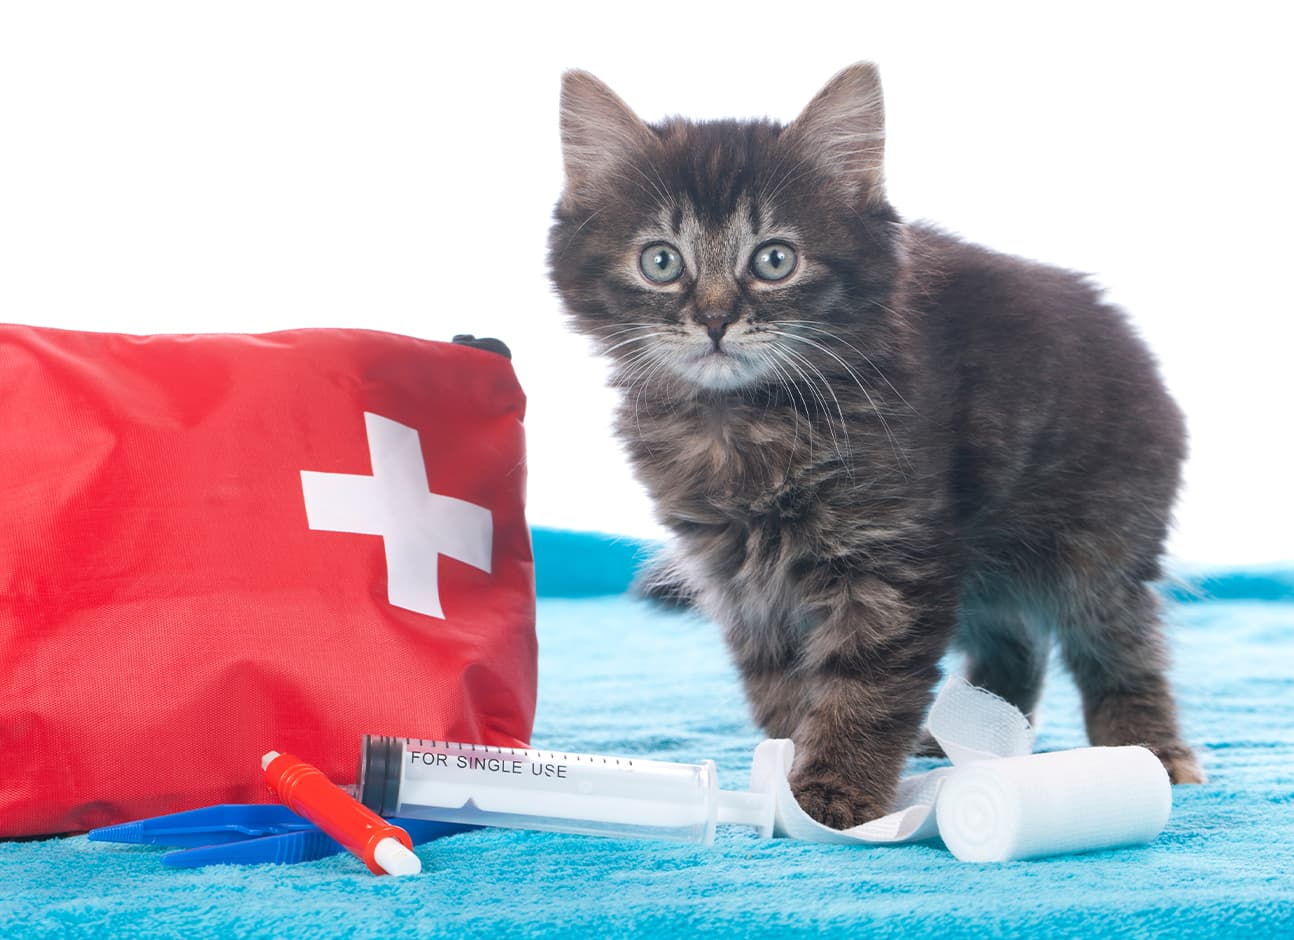 Kitty and emergency kit